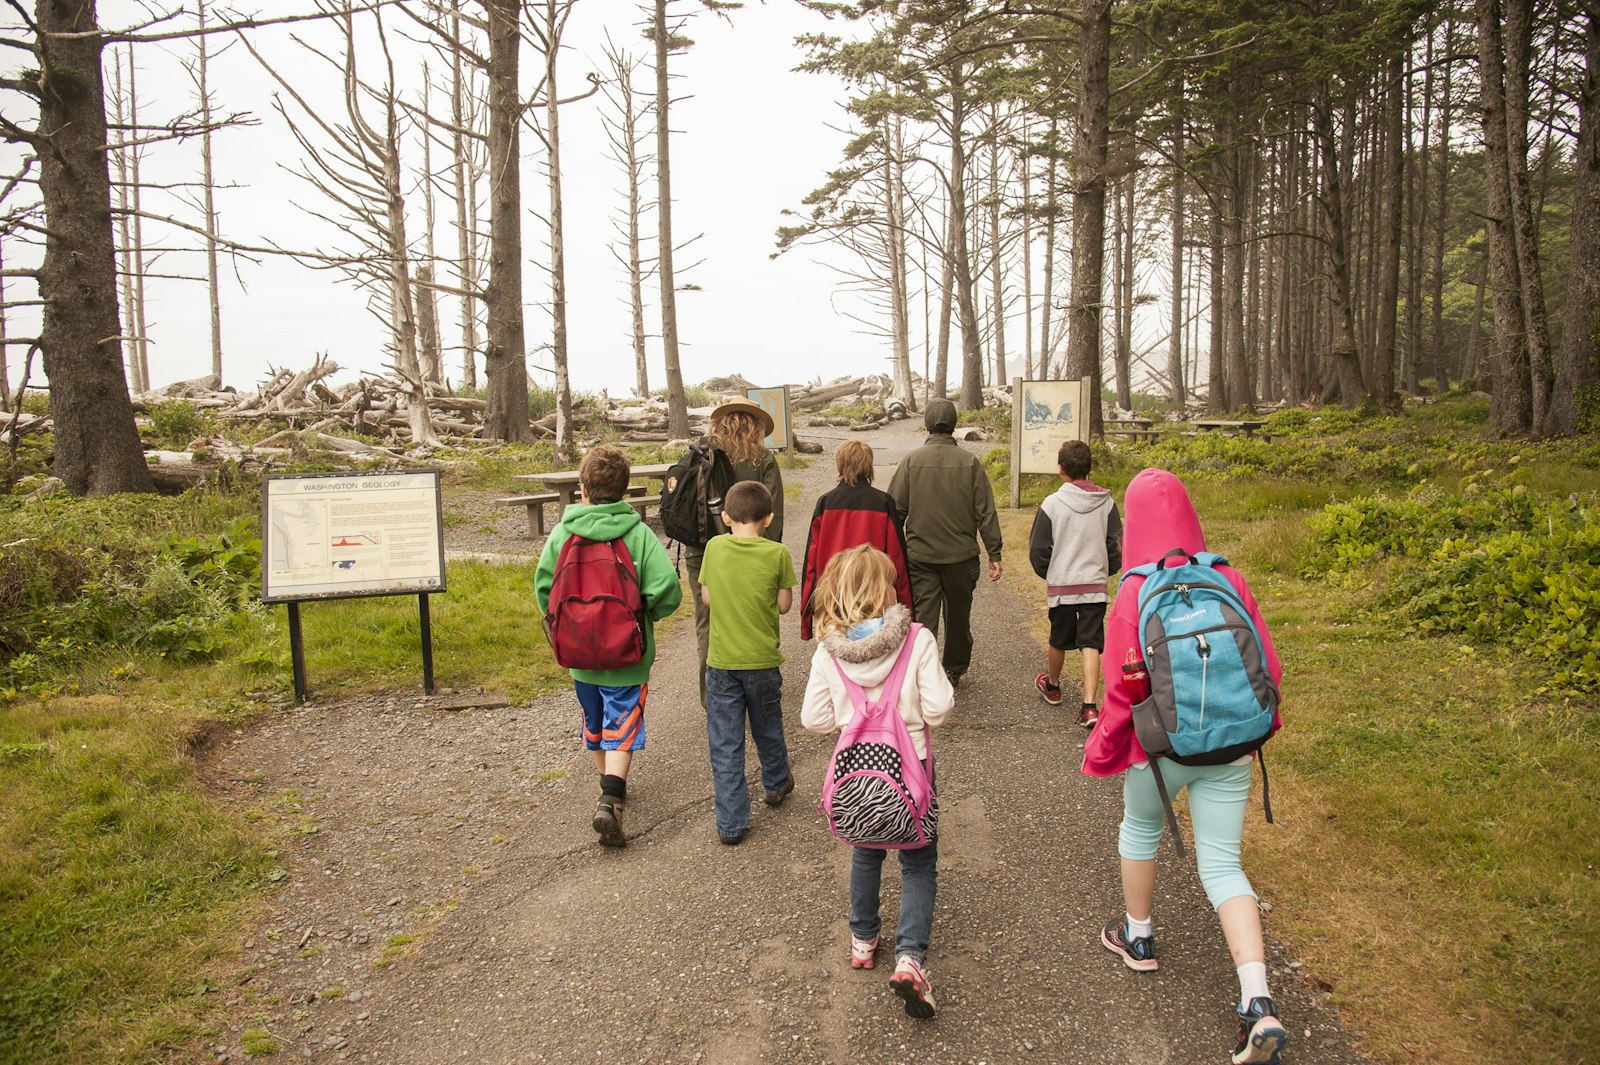 A group of kids and adults walk along a trail into a sparse forest